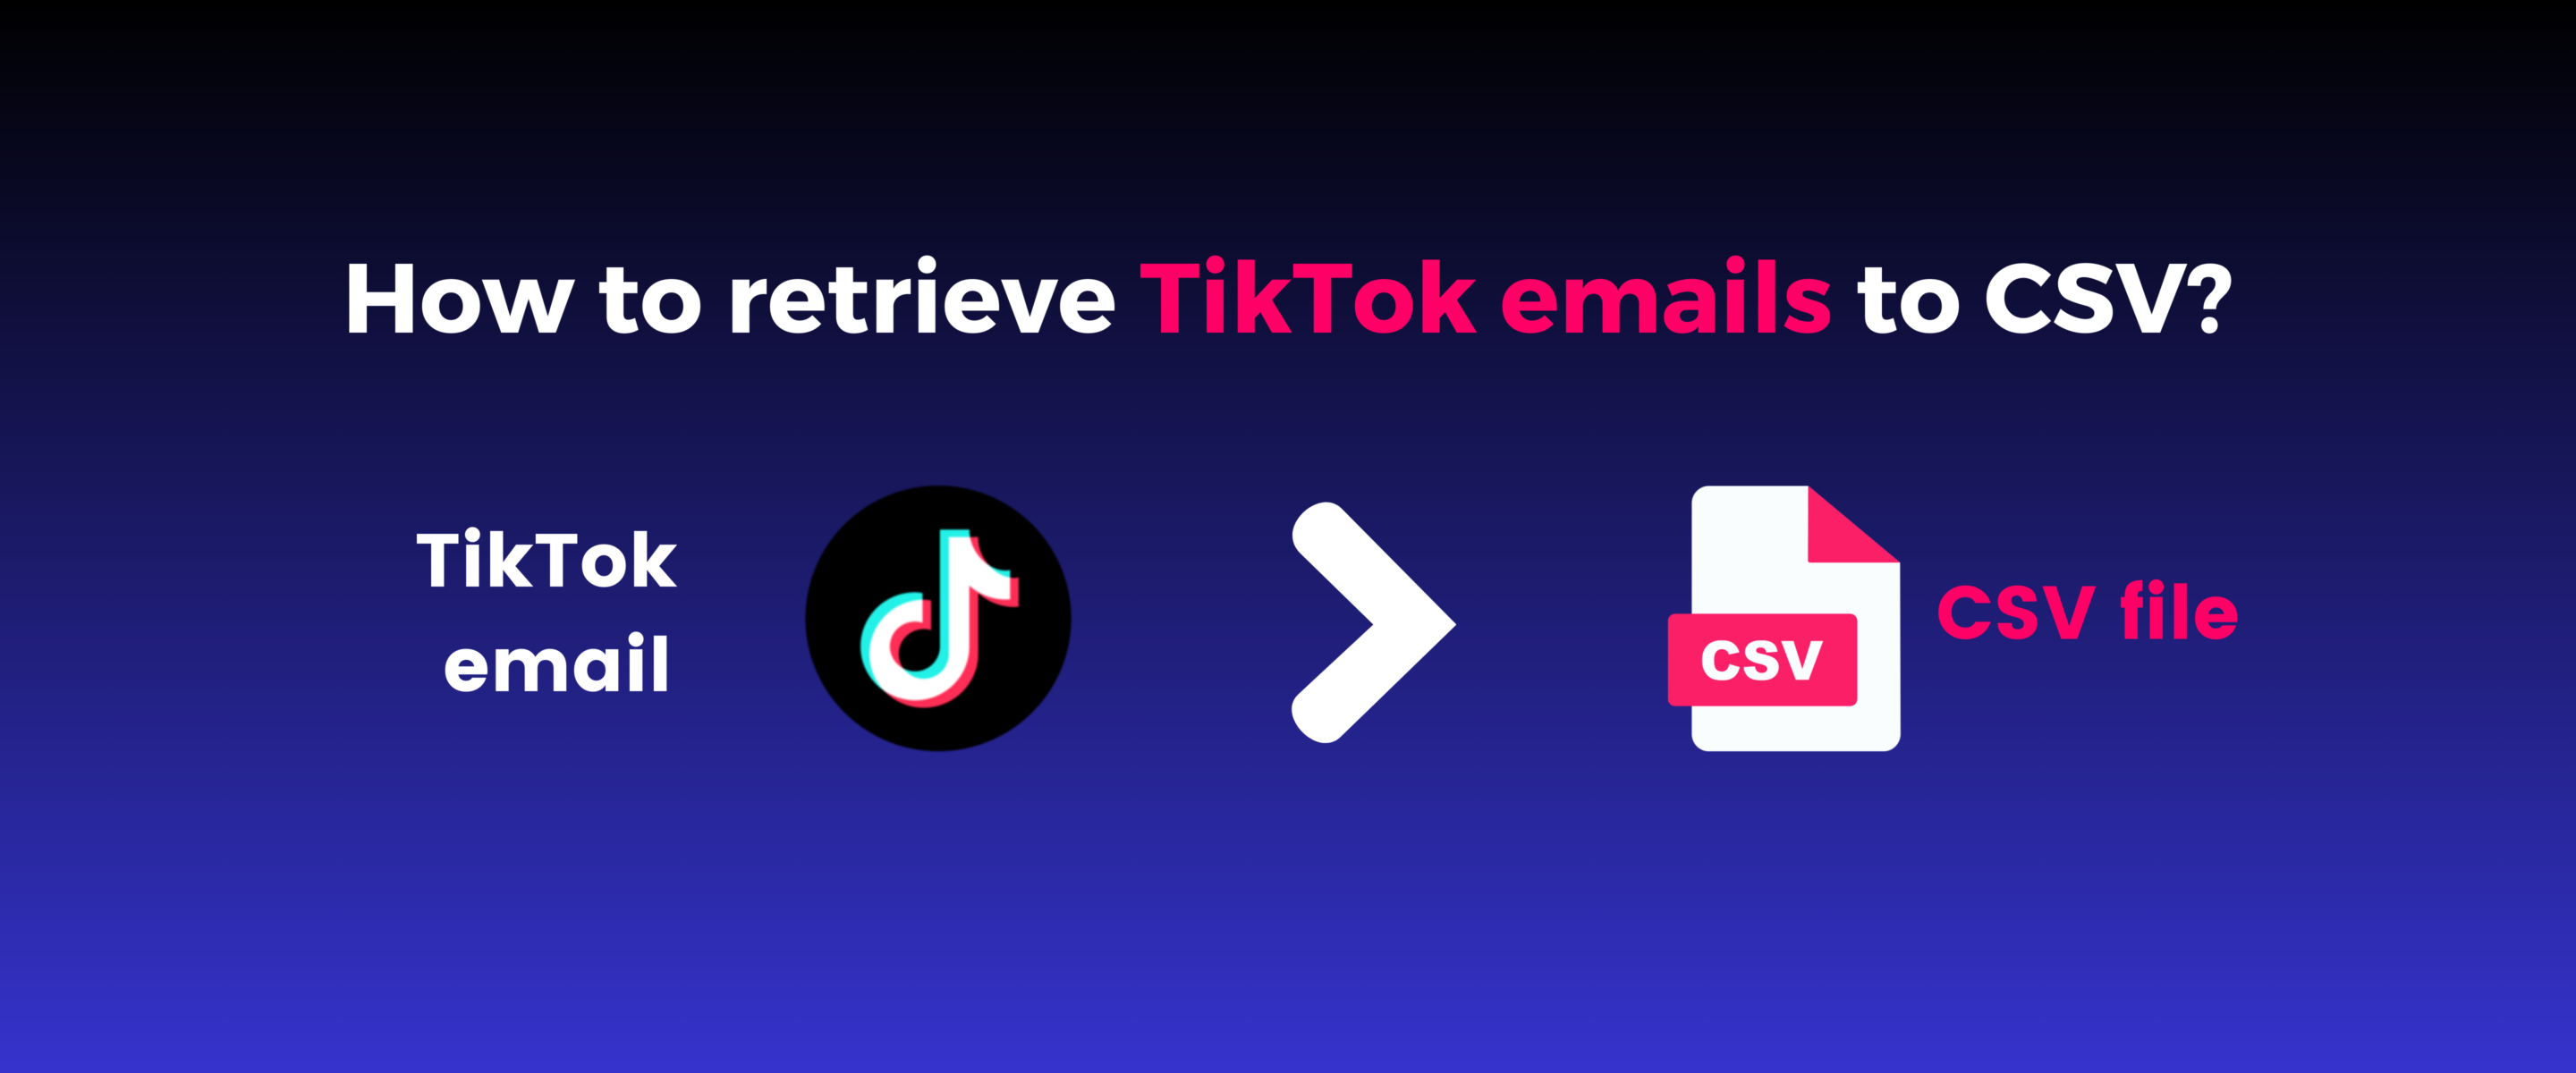 How to find tiktok emails and export in CSV.